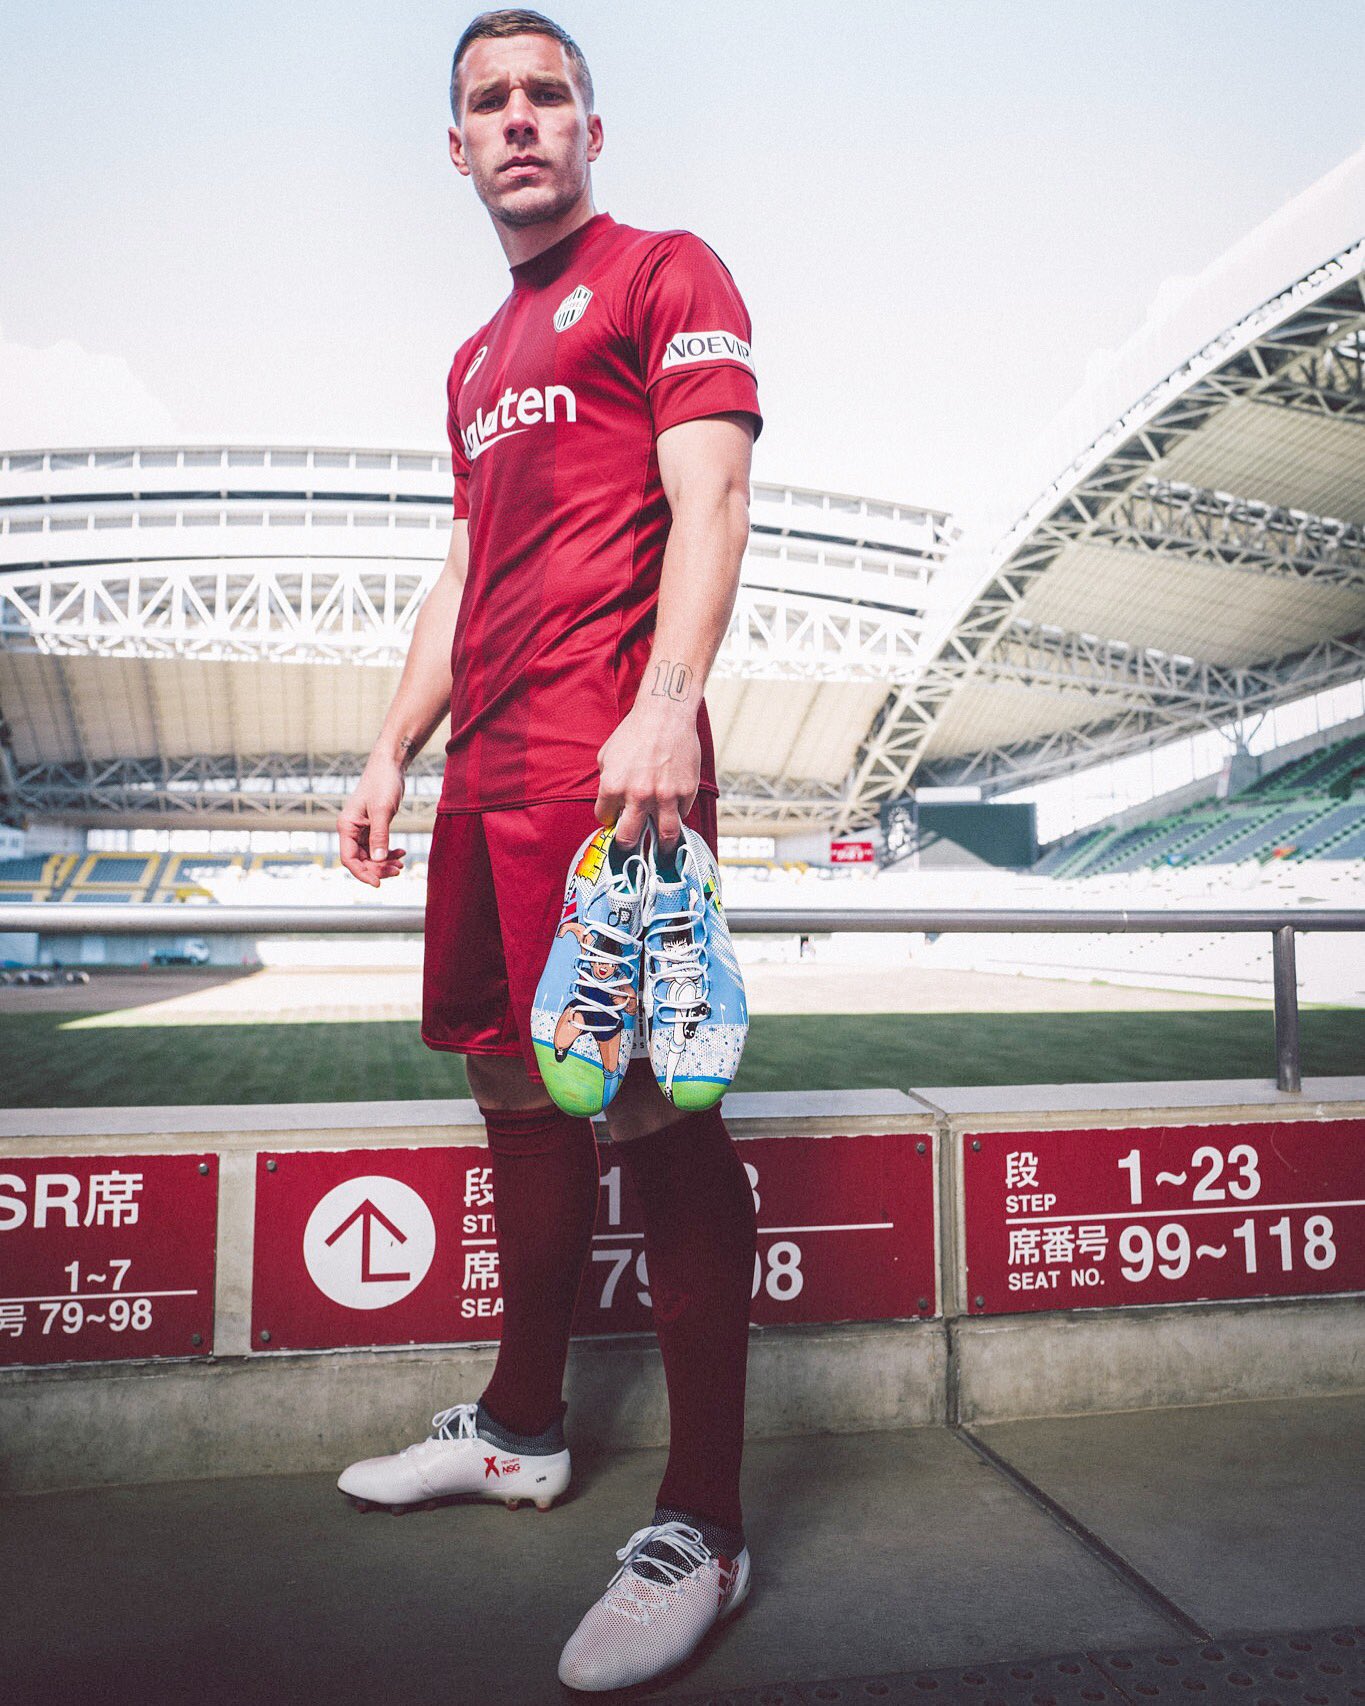 Lukas Podolski Com Do You Like My New X17 Boots Captain Tsubasa Has Always Been One Of My Biggest Inspirations Since I Was A Kid It S An Honor To Support Japanese Football